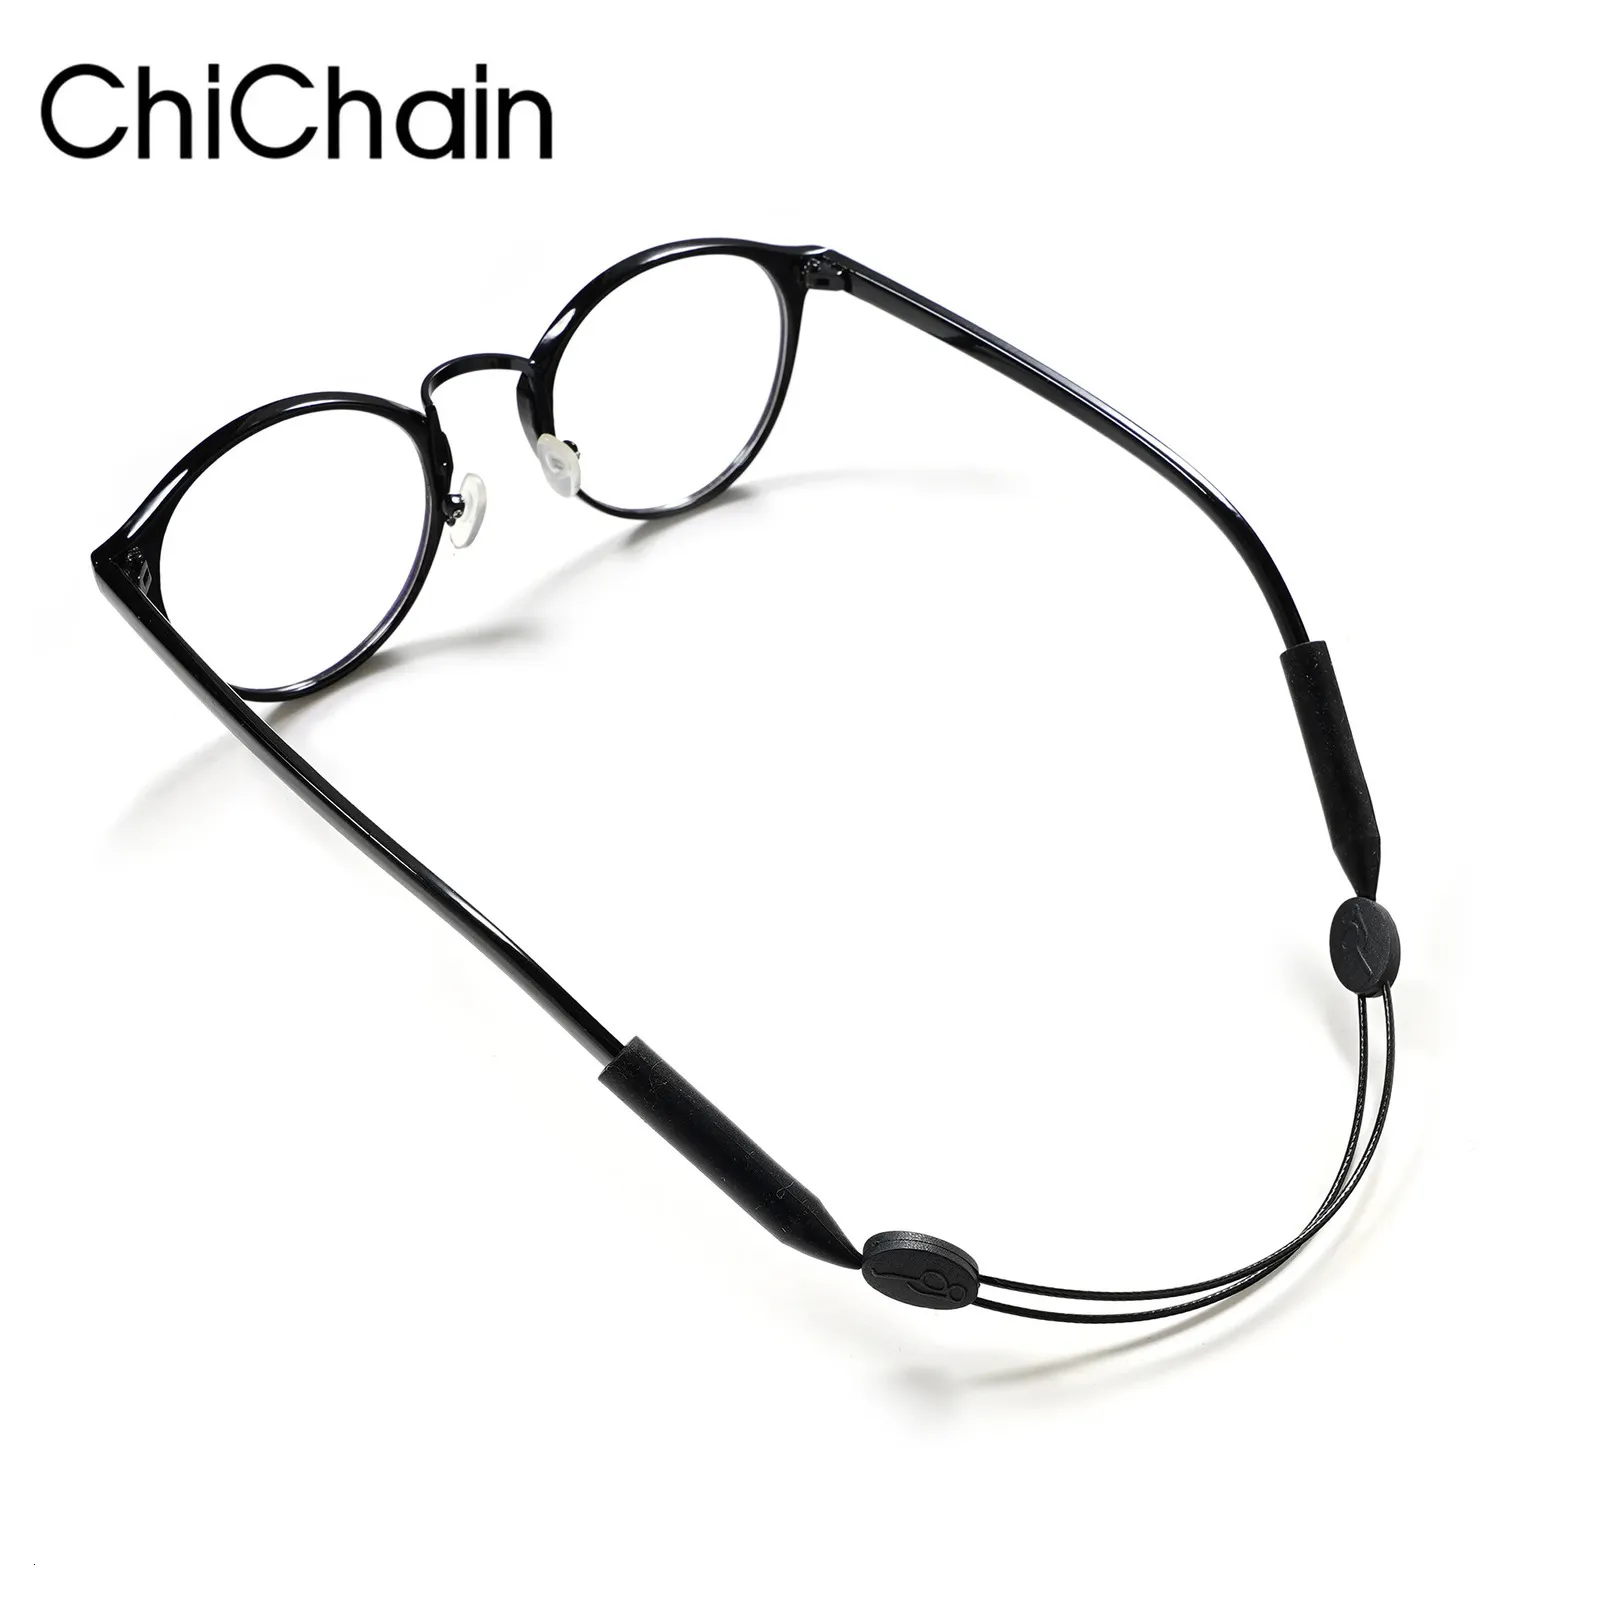 Eyewear Chain Premium Adjustable Eyewear holder with tailless sports glasses sunglasses string retained from 3 lengths 231201